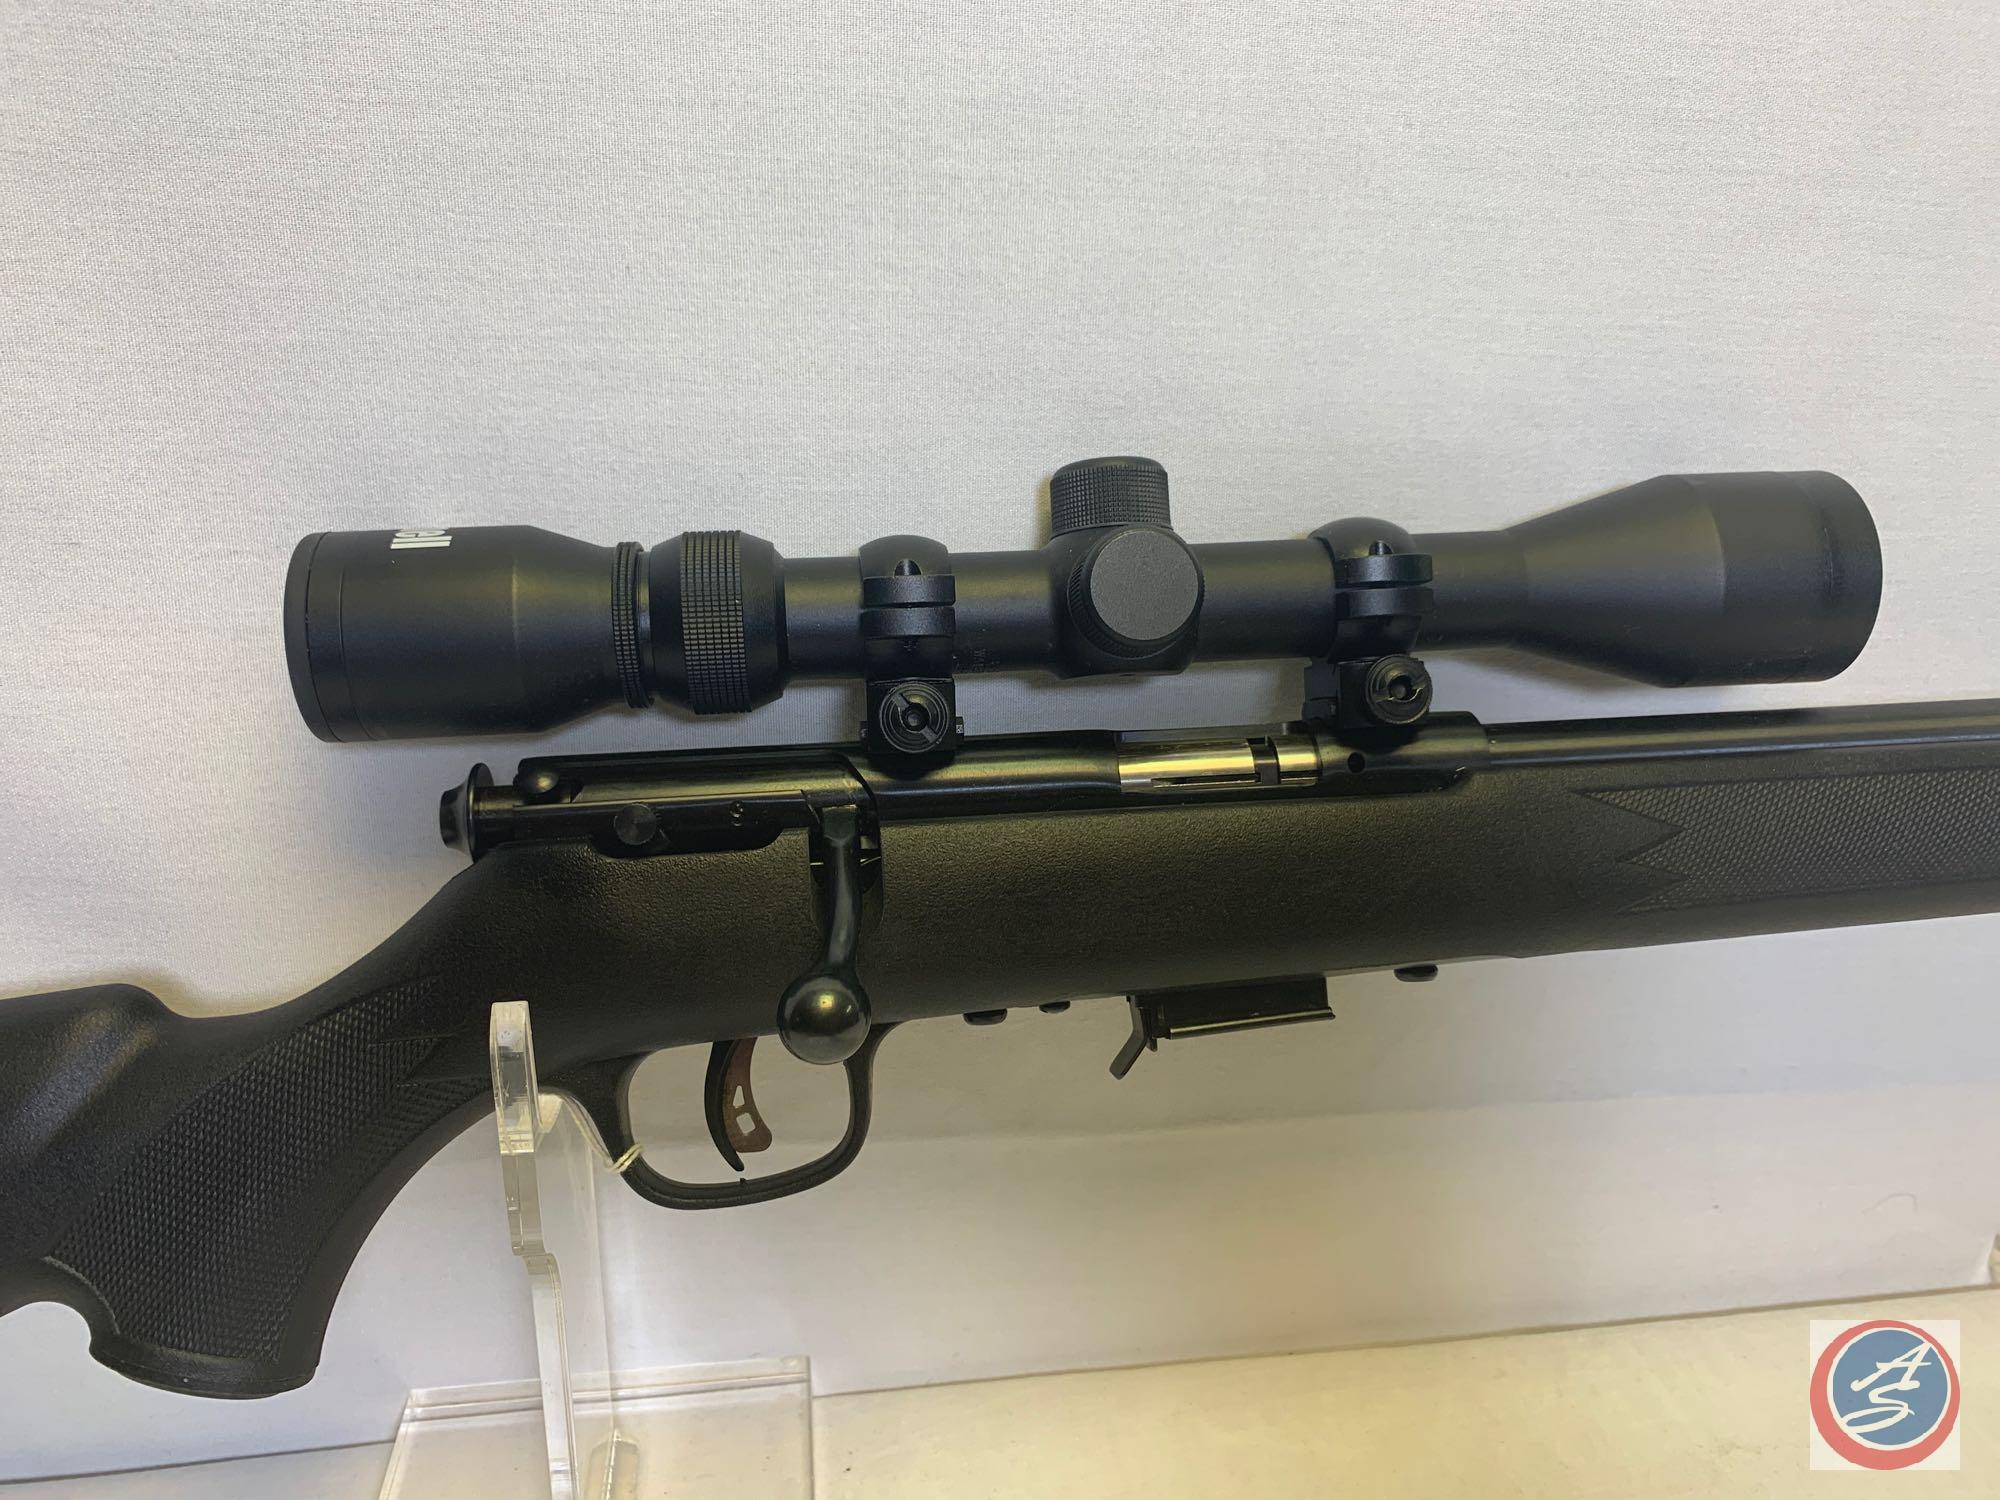 Savage Model 93r17 17 HMR Rifle Bolt action rifle with 21 inch barrel, Bushnell 3-9 scope and